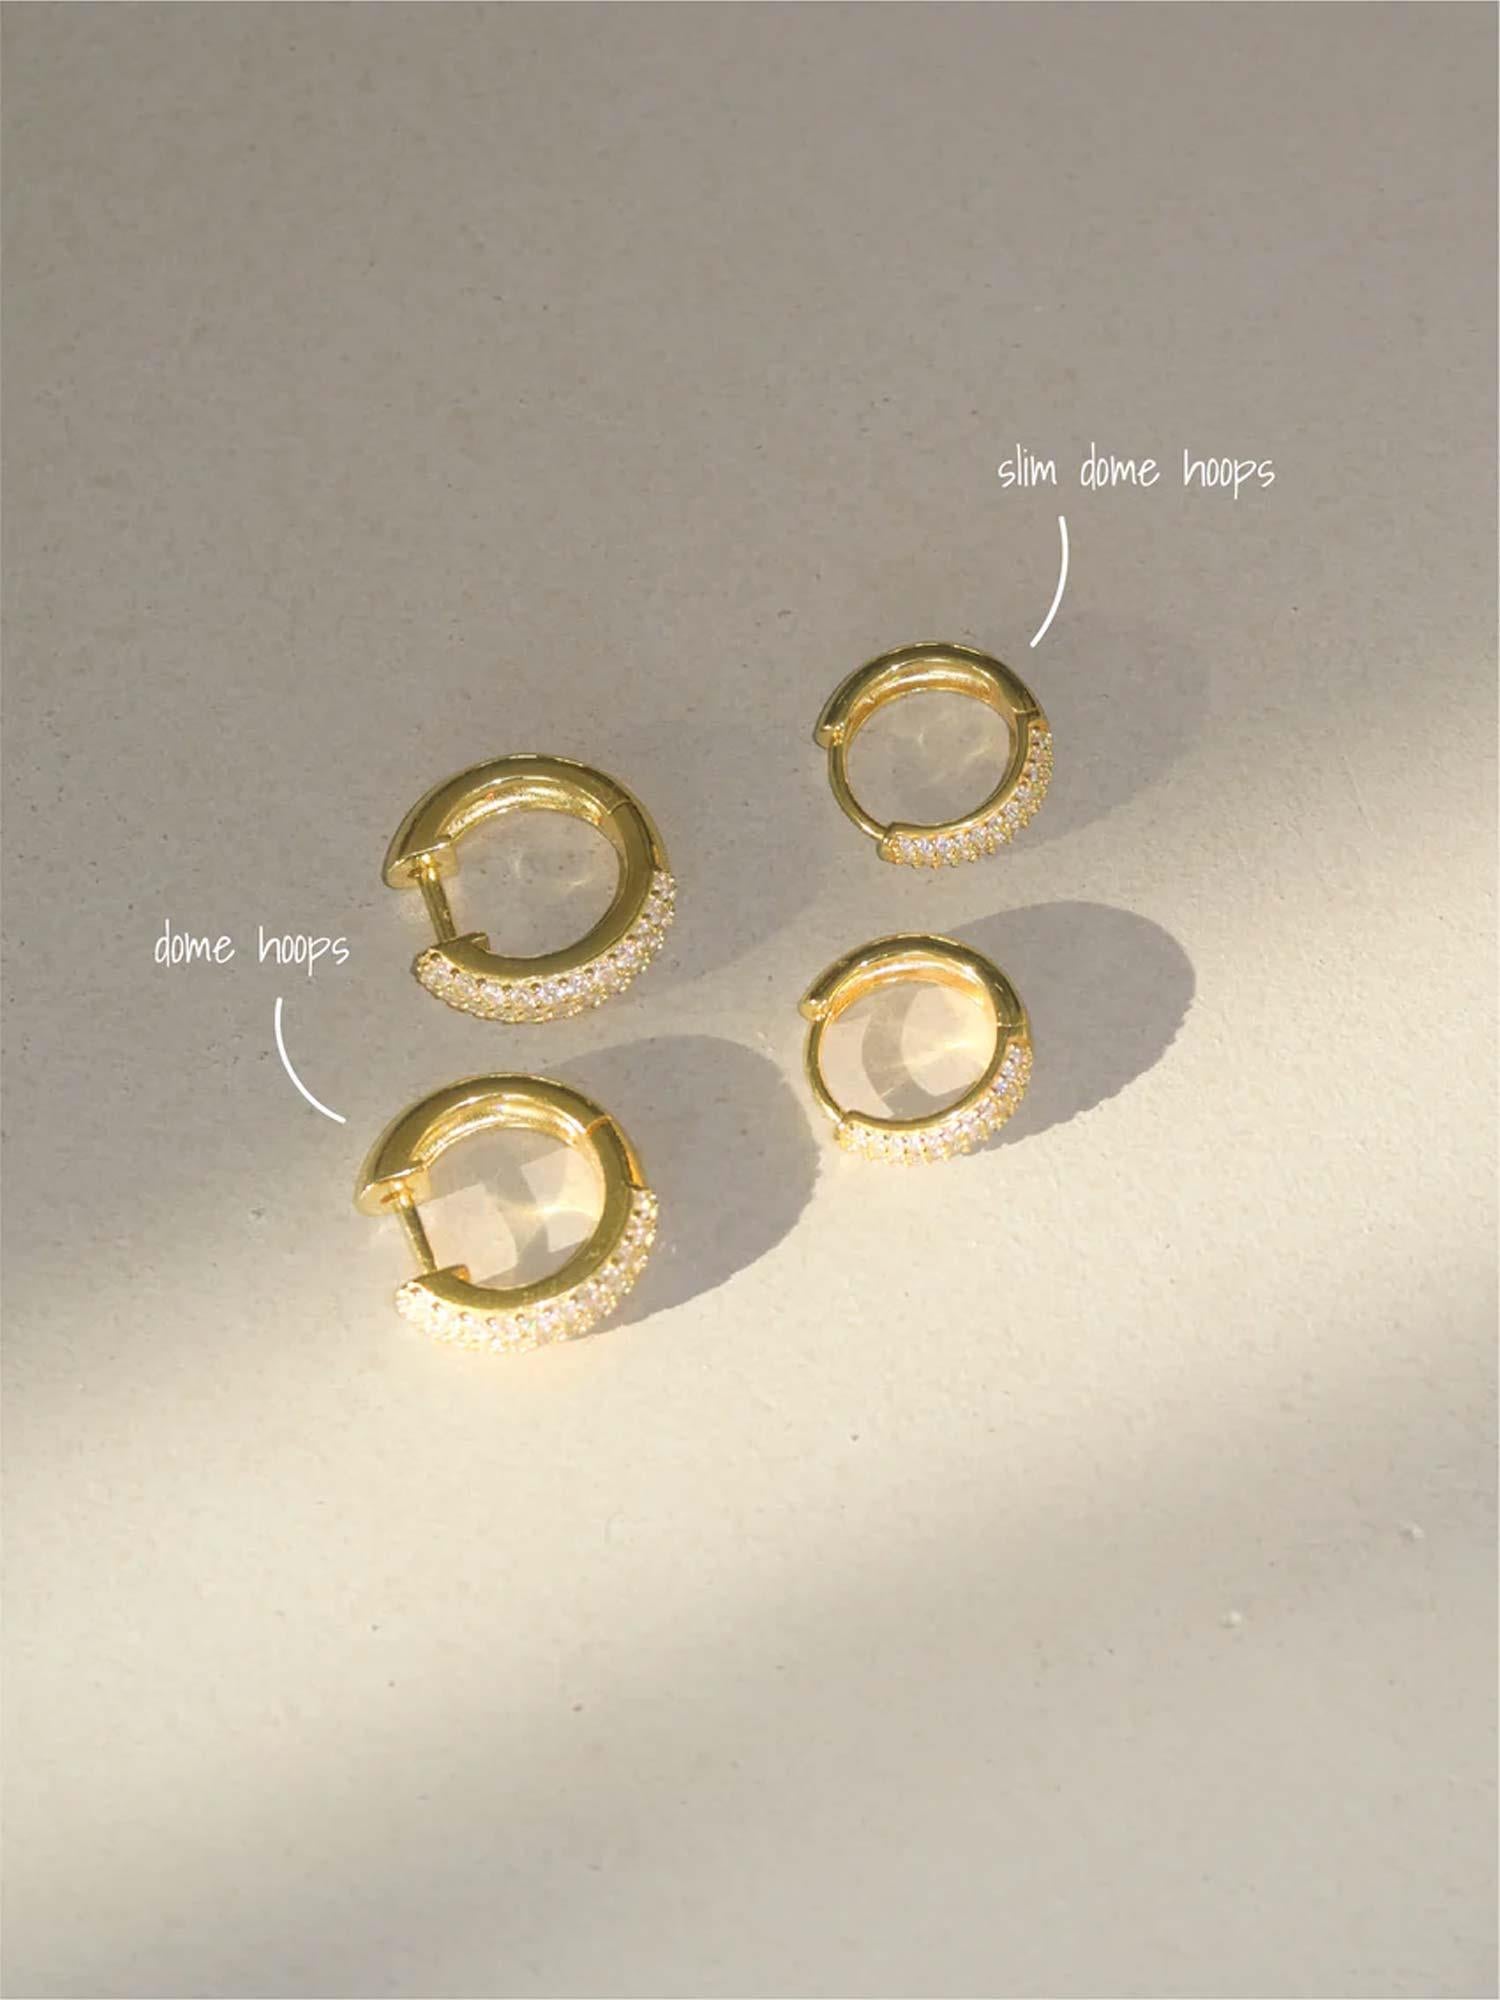 Slim Dome Hoops - Gold